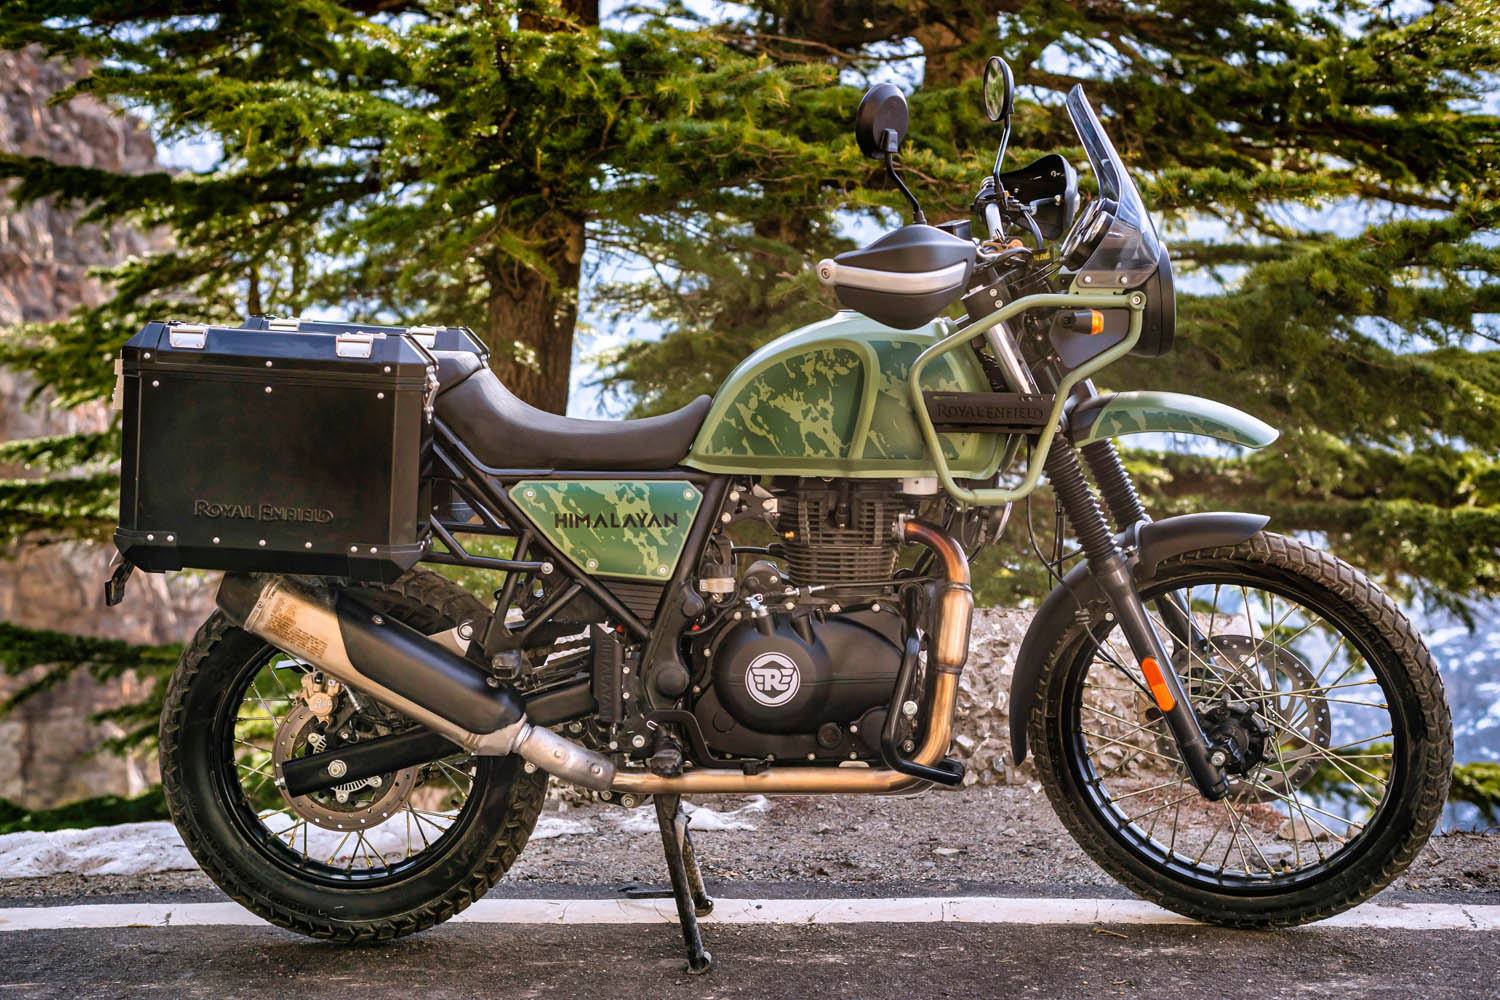 An Overview of the Royal Enfield Himalayan Motorcycle